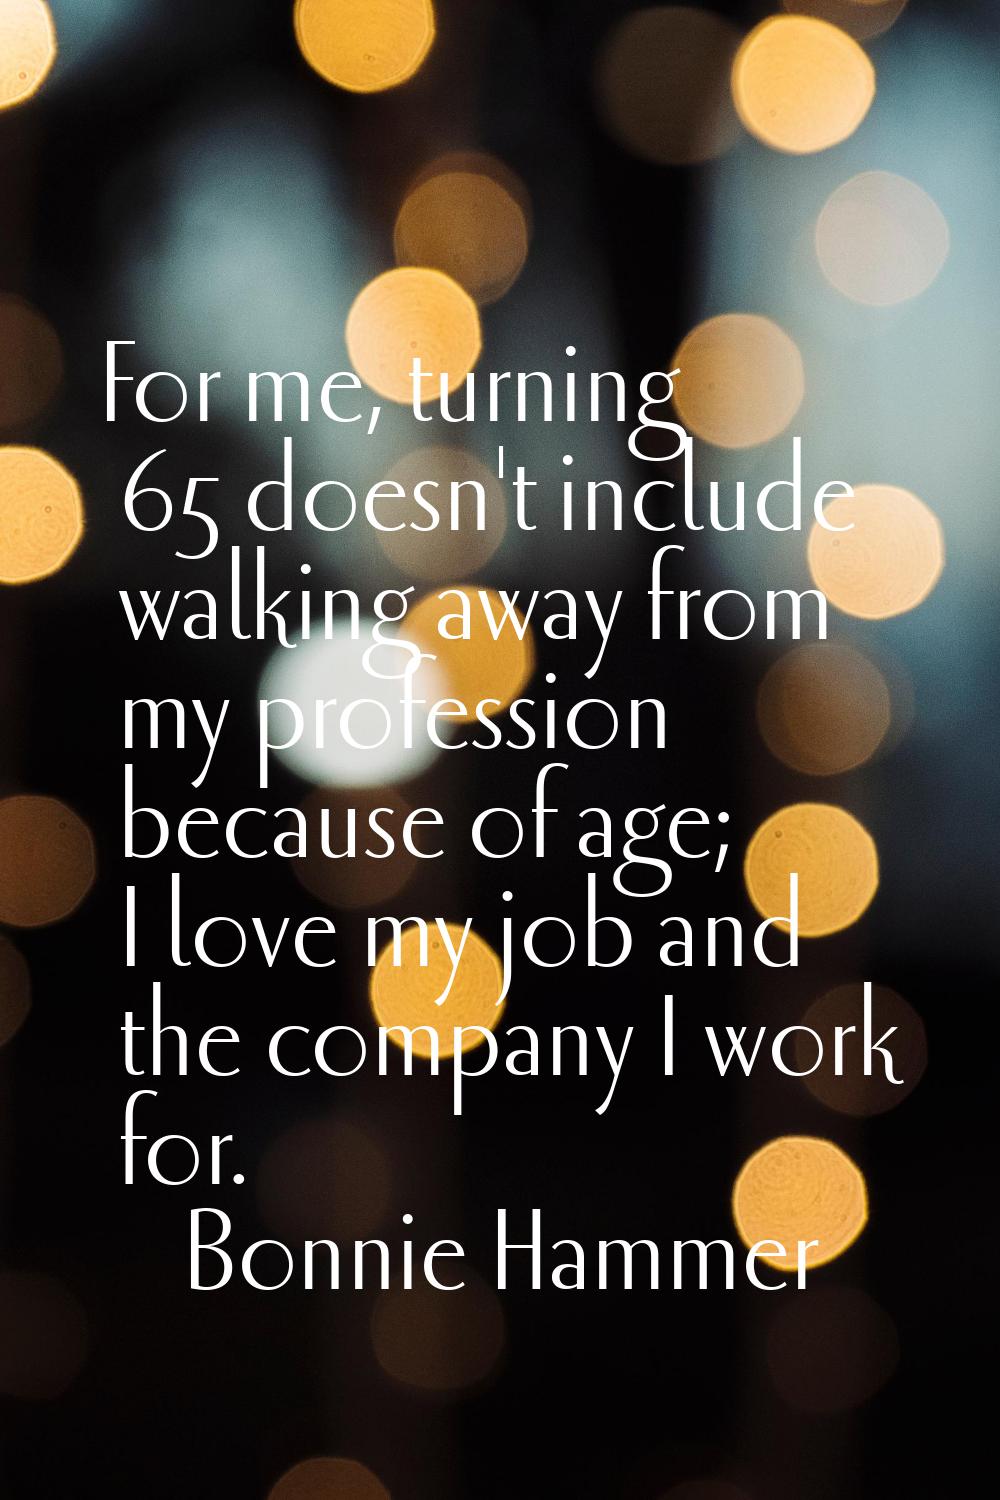 For me, turning 65 doesn't include walking away from my profession because of age; I love my job an